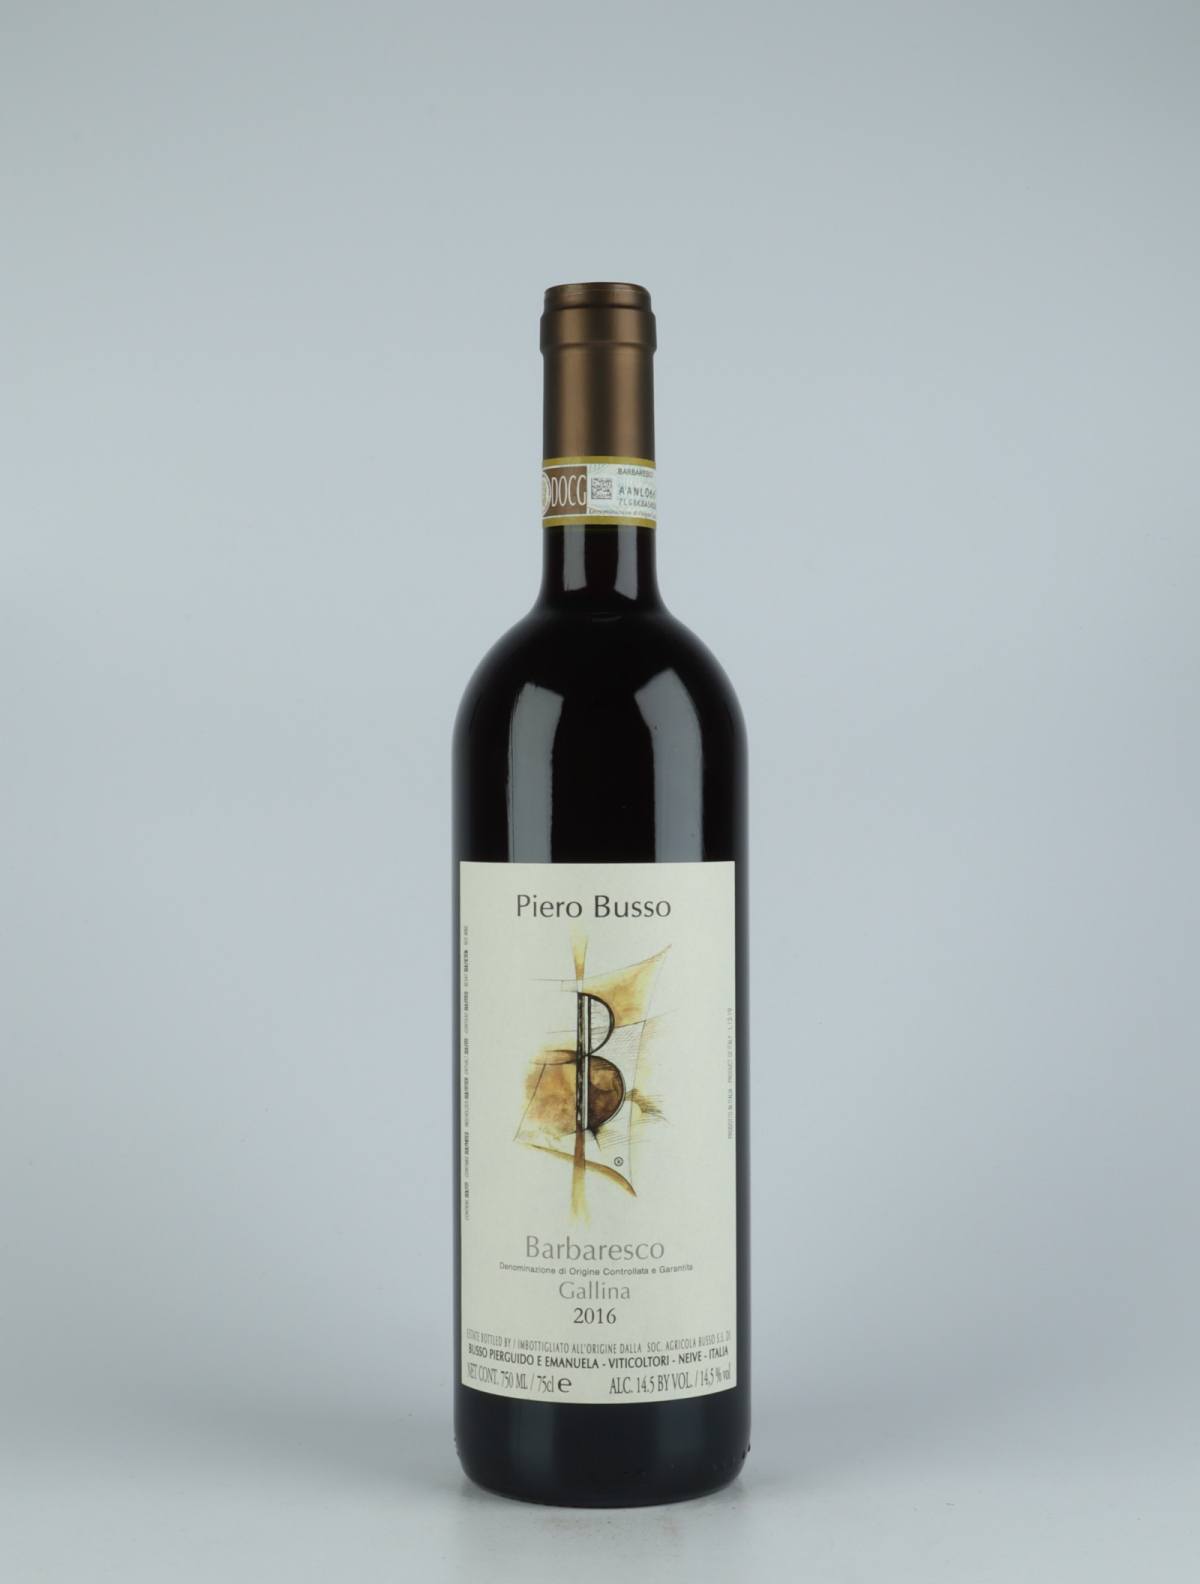 A bottle 2016 Barbaresco Gallina Red wine from Piero Busso, Piedmont in Italy